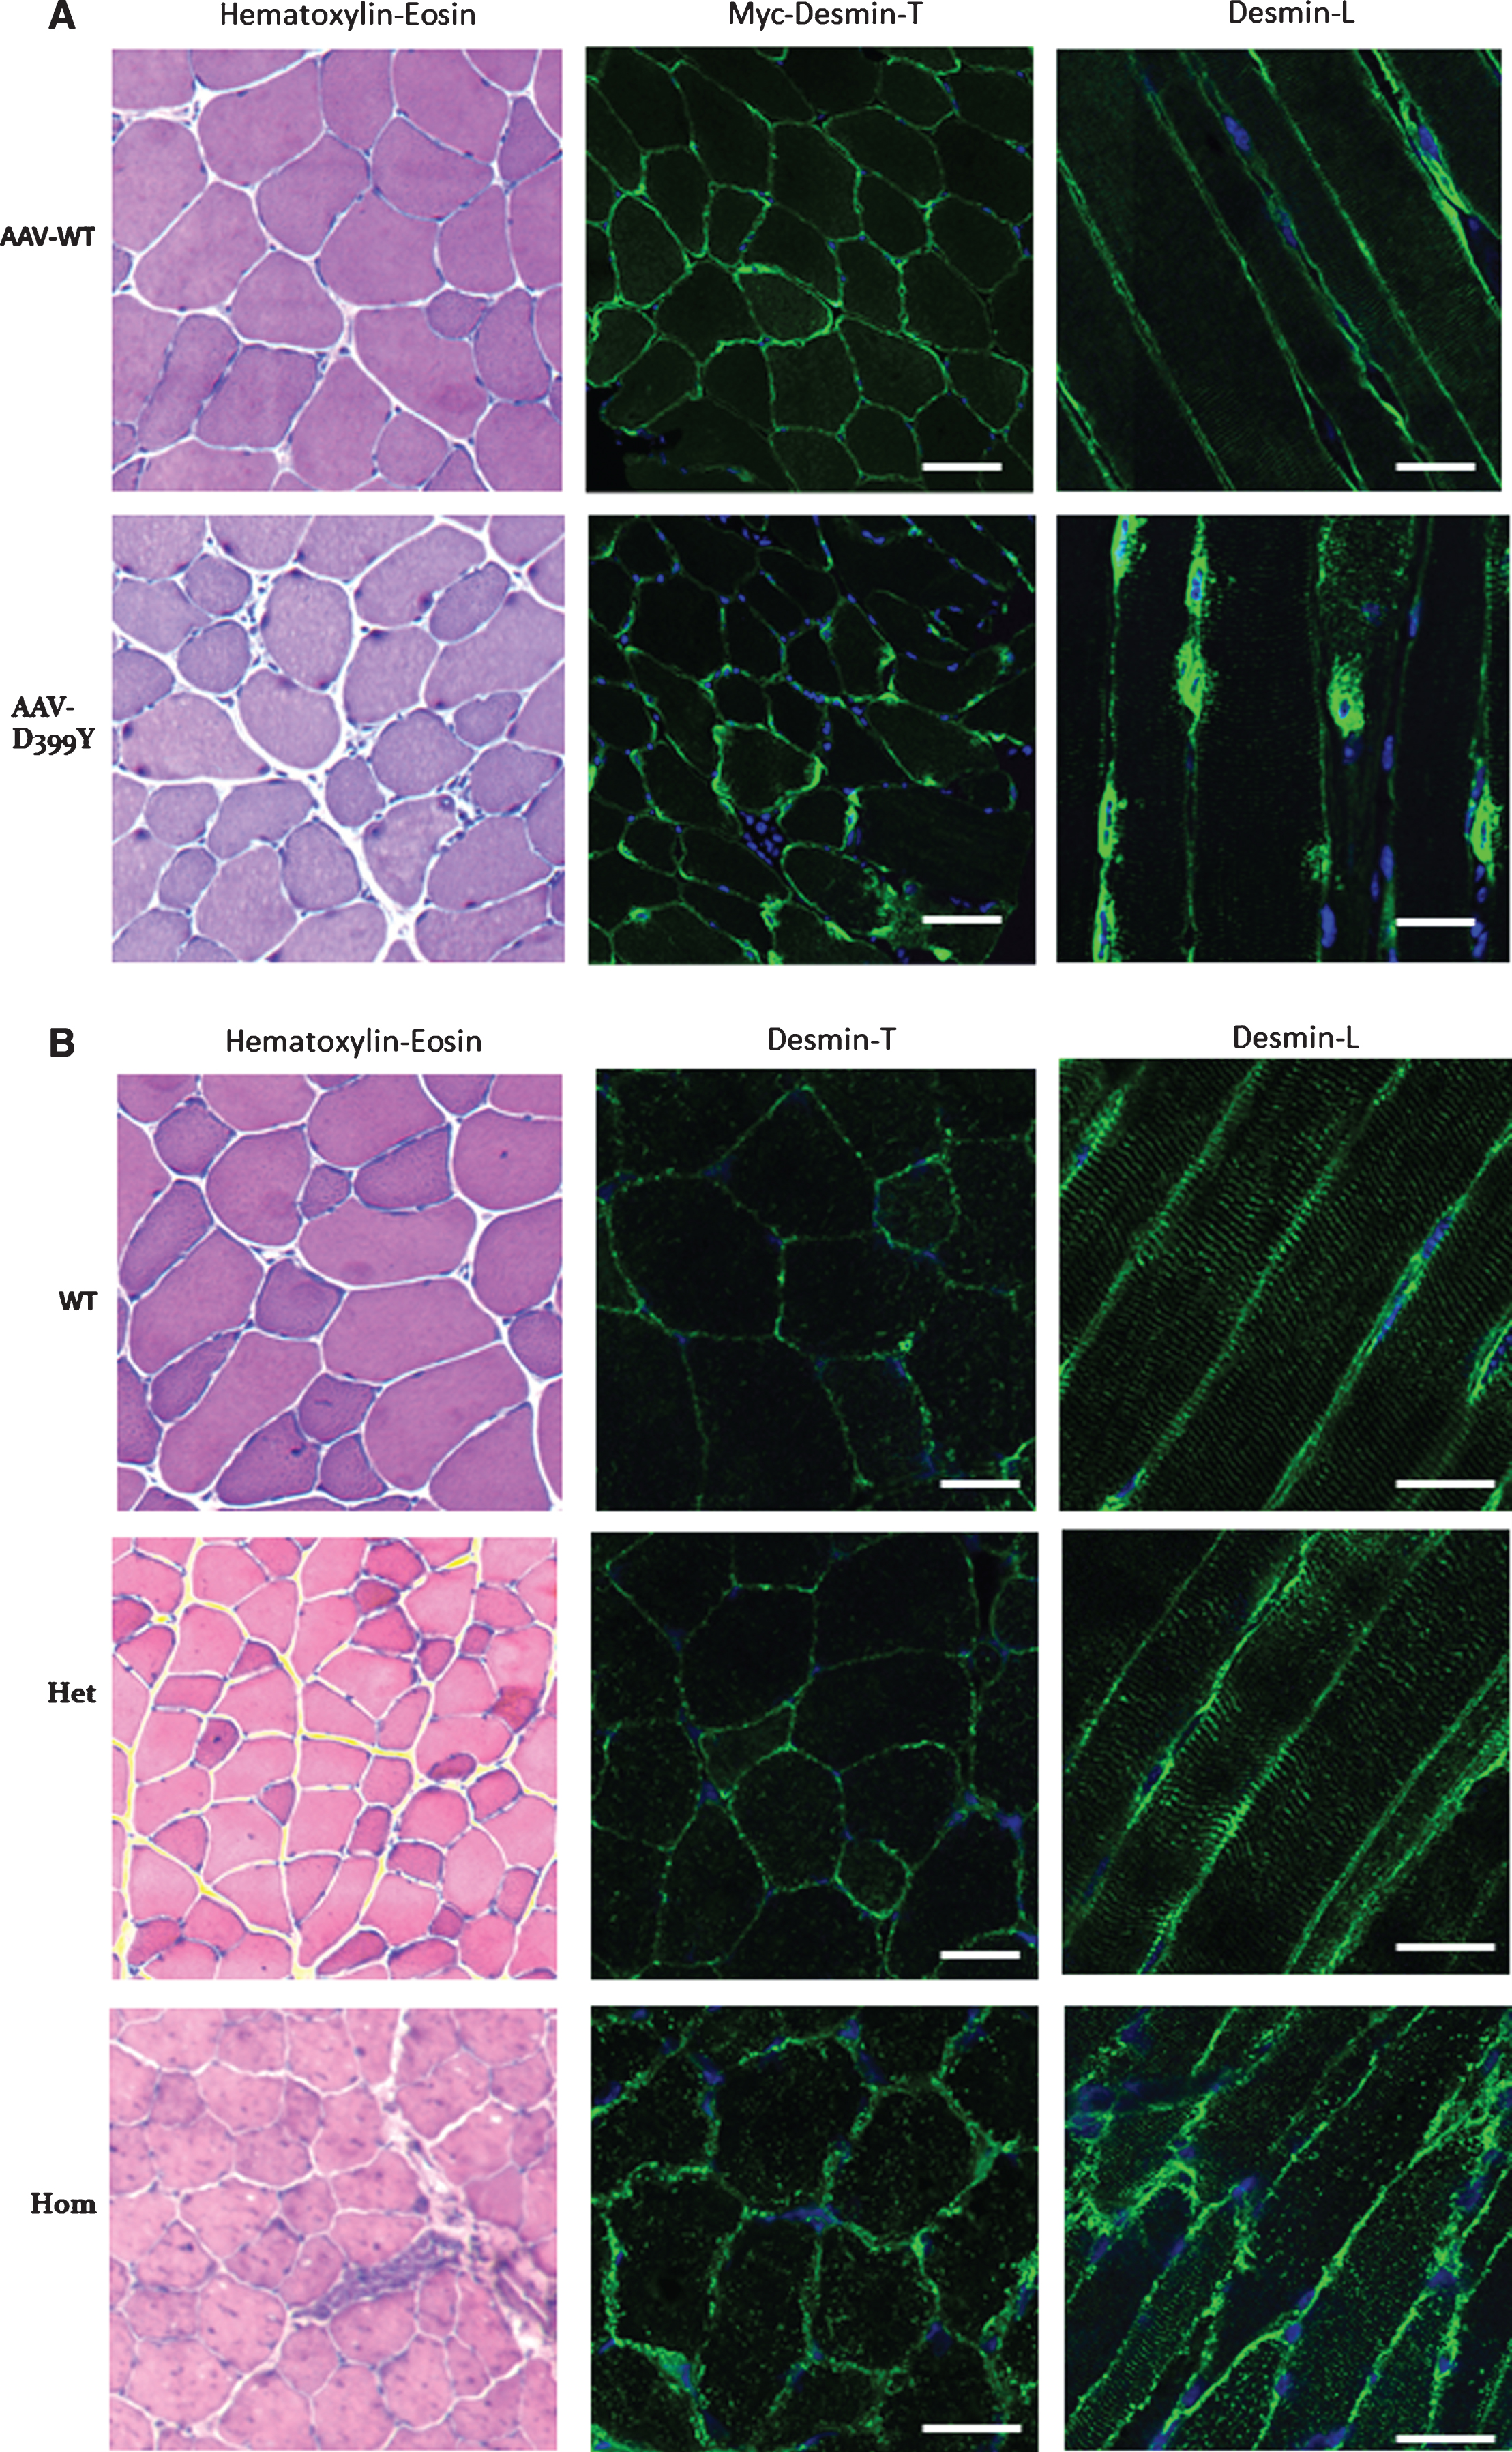 Altered desmin subcellular distribution in skeletal muscle tissue. A- 11-week-old mice (C57bl6J) were injected in tibialis anterior (TA) with associated-adeno-virus (AAV) encoding Myc-tagged wild-type (WT) or D399Y desmin. One month later, TA were extracted and frozen, and Myc immunostaining on transverse or longitudinal cryosections was performed to detect exogenous desmin. D399Y shows a perinuclear accumulation related to human desmin aggregation observed in patients. Scale bar = 20 μm. B- DesKI-R405W mice (homologous to R406W mutation in human, C57bl6N) were analyzed at 3 months old. Briefly, TA were extracted and frozen and desmin immunostaining was performed on transverse or longitudinal cryosections to detect endogenous desmin in homozygous (Hom), heterozygous (Het) or wild-type (WT) mice. A typical desminopathy staining pattern with predominantly subsarcolemmal and also sarcoplasmic desmin-positive protein aggregates can be observed in homozygous tissue. Moreover, a regular cross-striated desmin pattern is present in WT mice, and mainly preserved in HET mice, whereas Hom mice show an altered striation and fiber shapes. Scale bar = 20 μm.